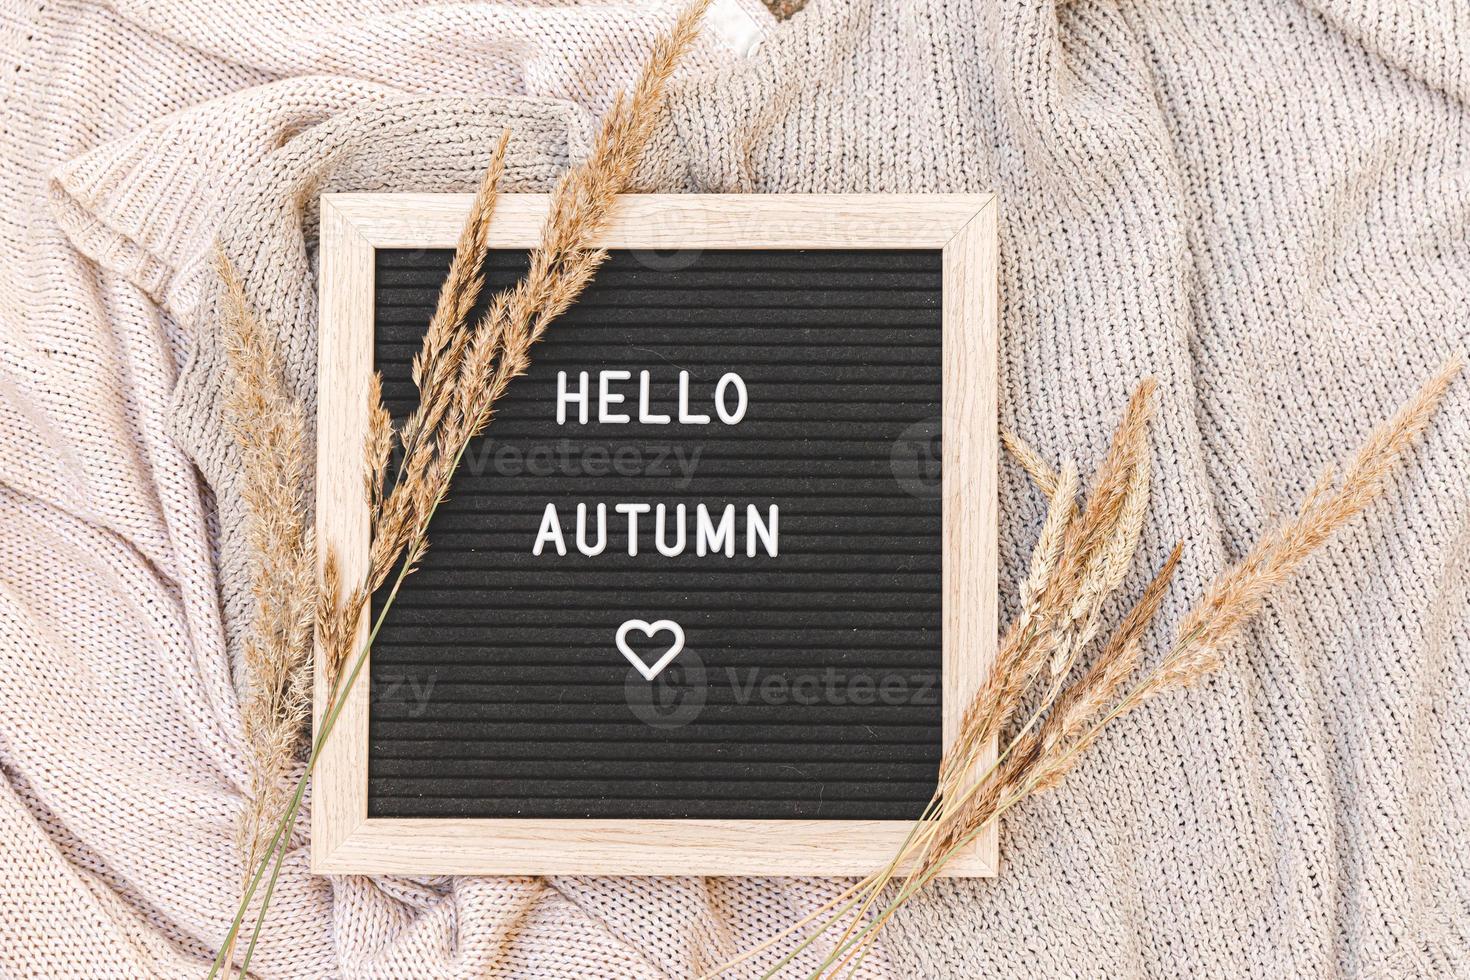 Autumnal Background. Black letter board with text phrase Hello Autumn and dried grass lying on white knitted sweater. Top view, flat lay. Thanksgiving banner. Hygge mood cold weather concept photo